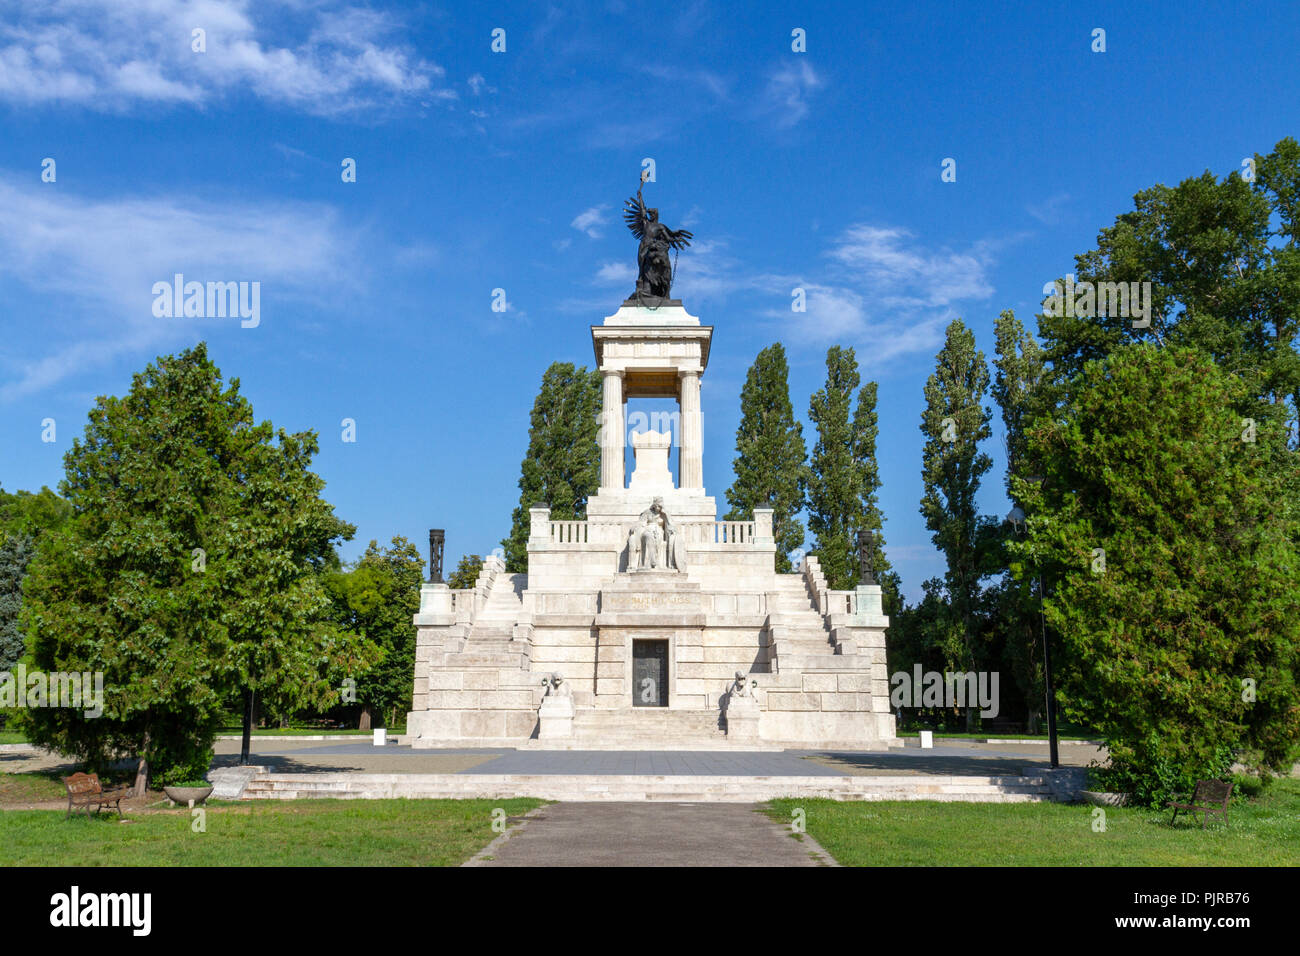 The Lajos Kossuth Mausoleum in the Kerepesi Cemetery, (Fiume Road National Graveyard), Budapest, Hungary. Stock Photo